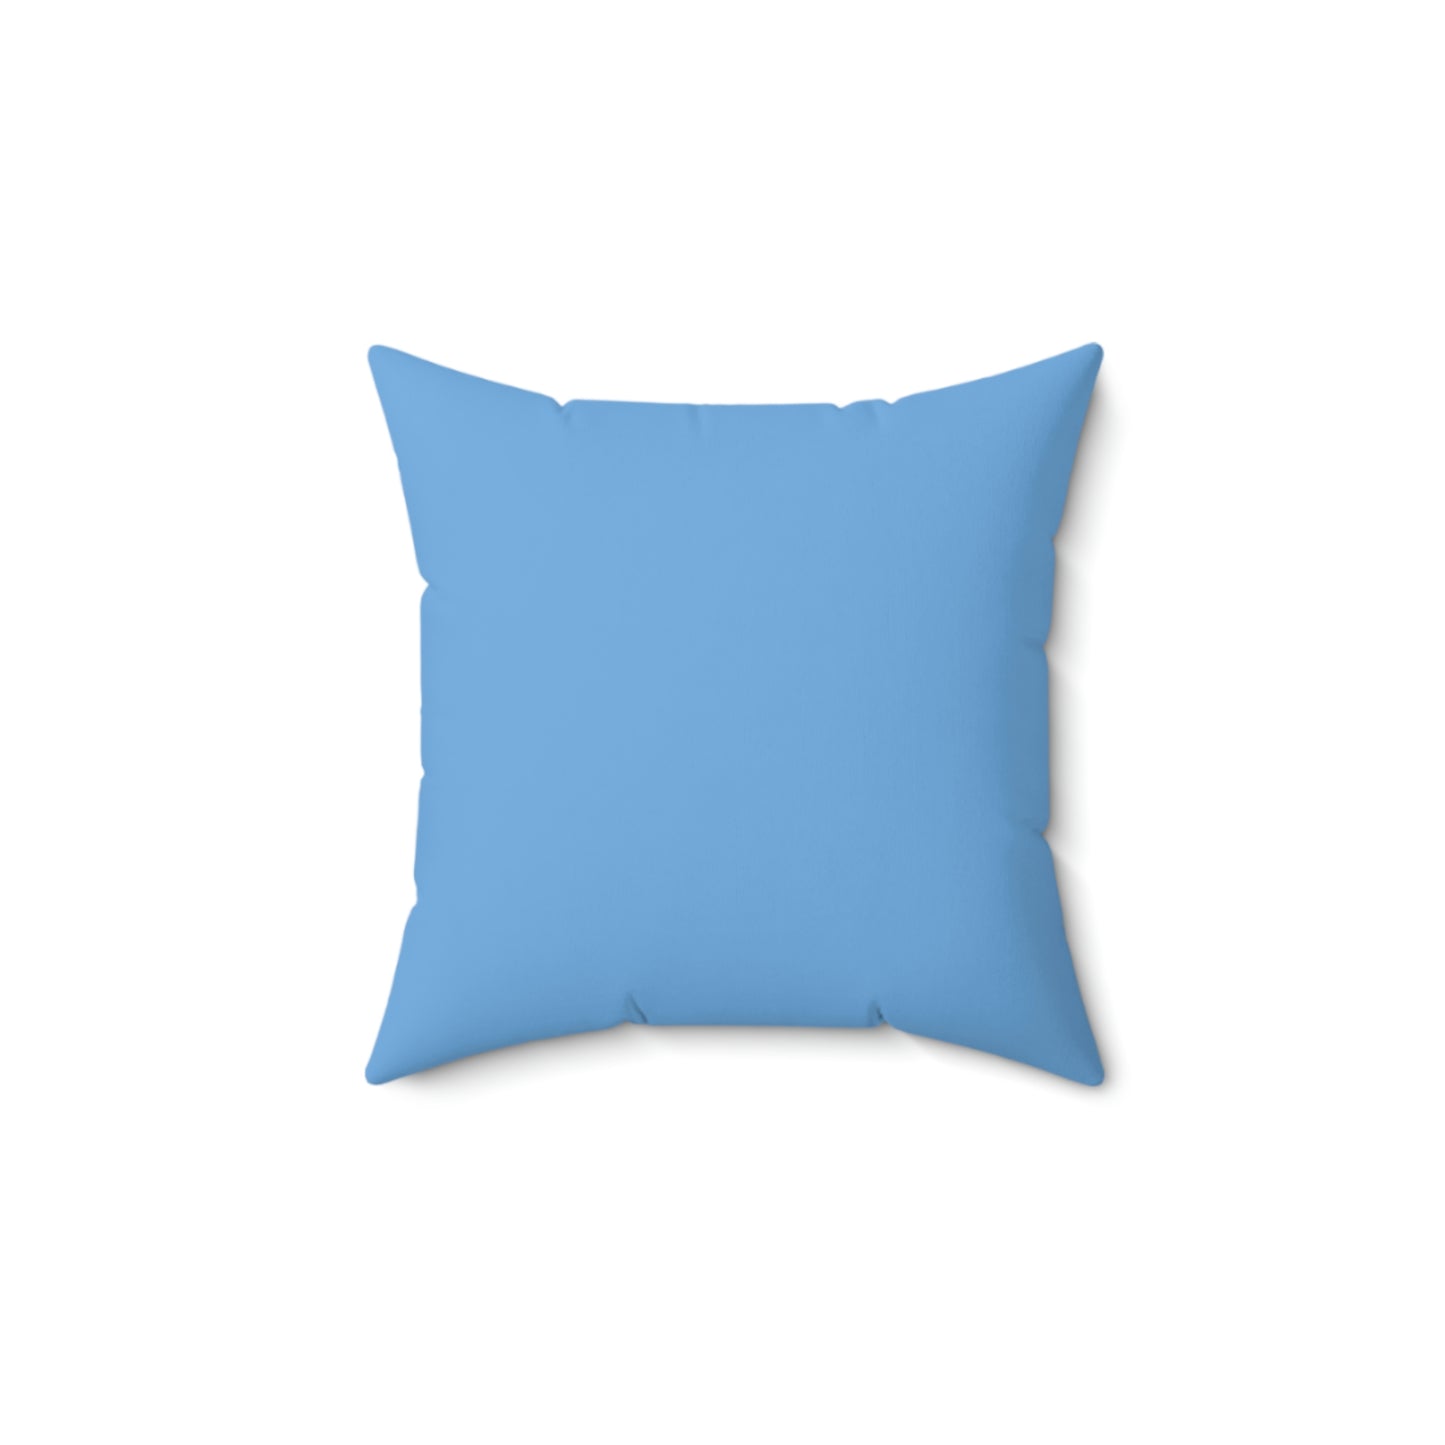 I love cats. it's all about cats. design (light blue) Spun Polyester Square Indoor Pillow